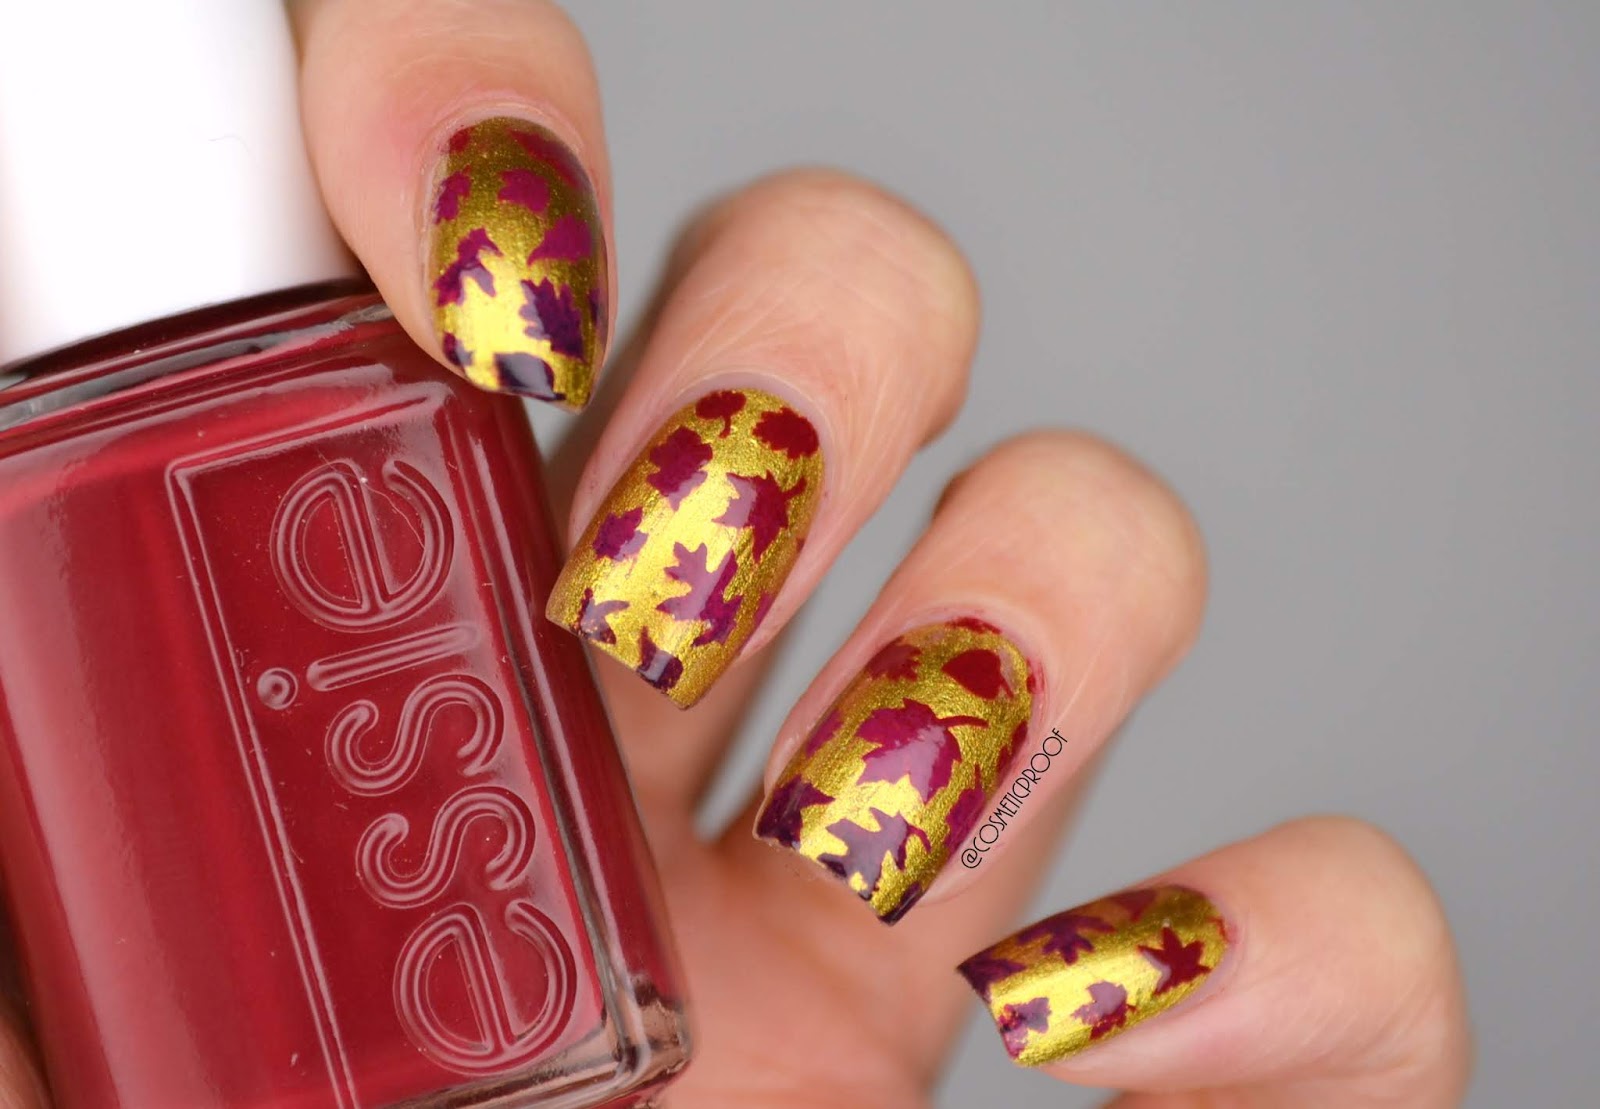 5. "Maple Leaf Nail Stamping Tutorial" - wide 7